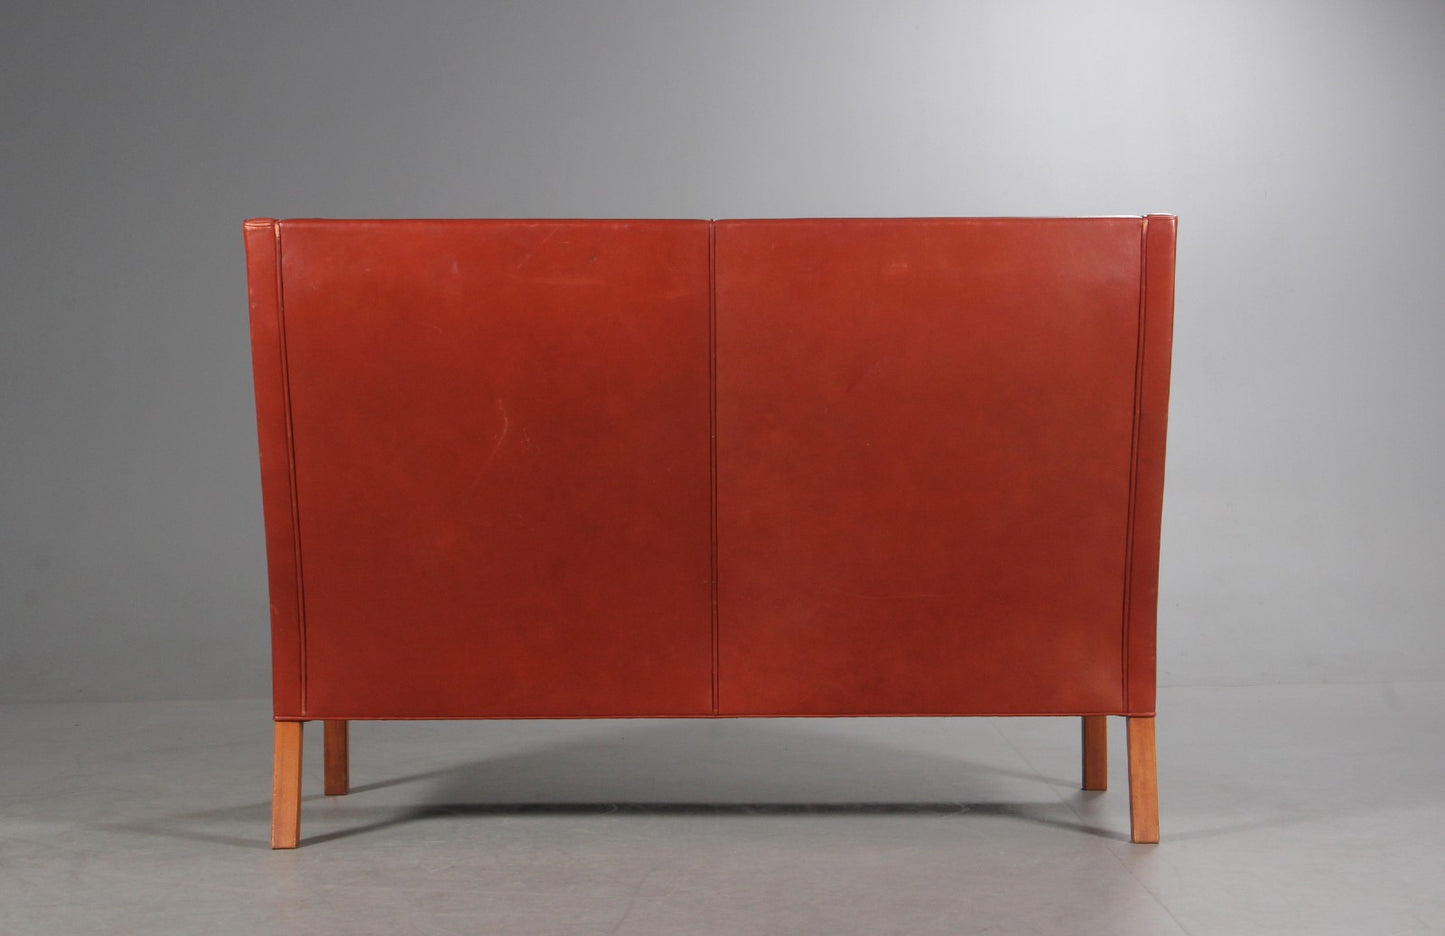 Børge Mogensen. Two seat sofa, model 2192 in leather.